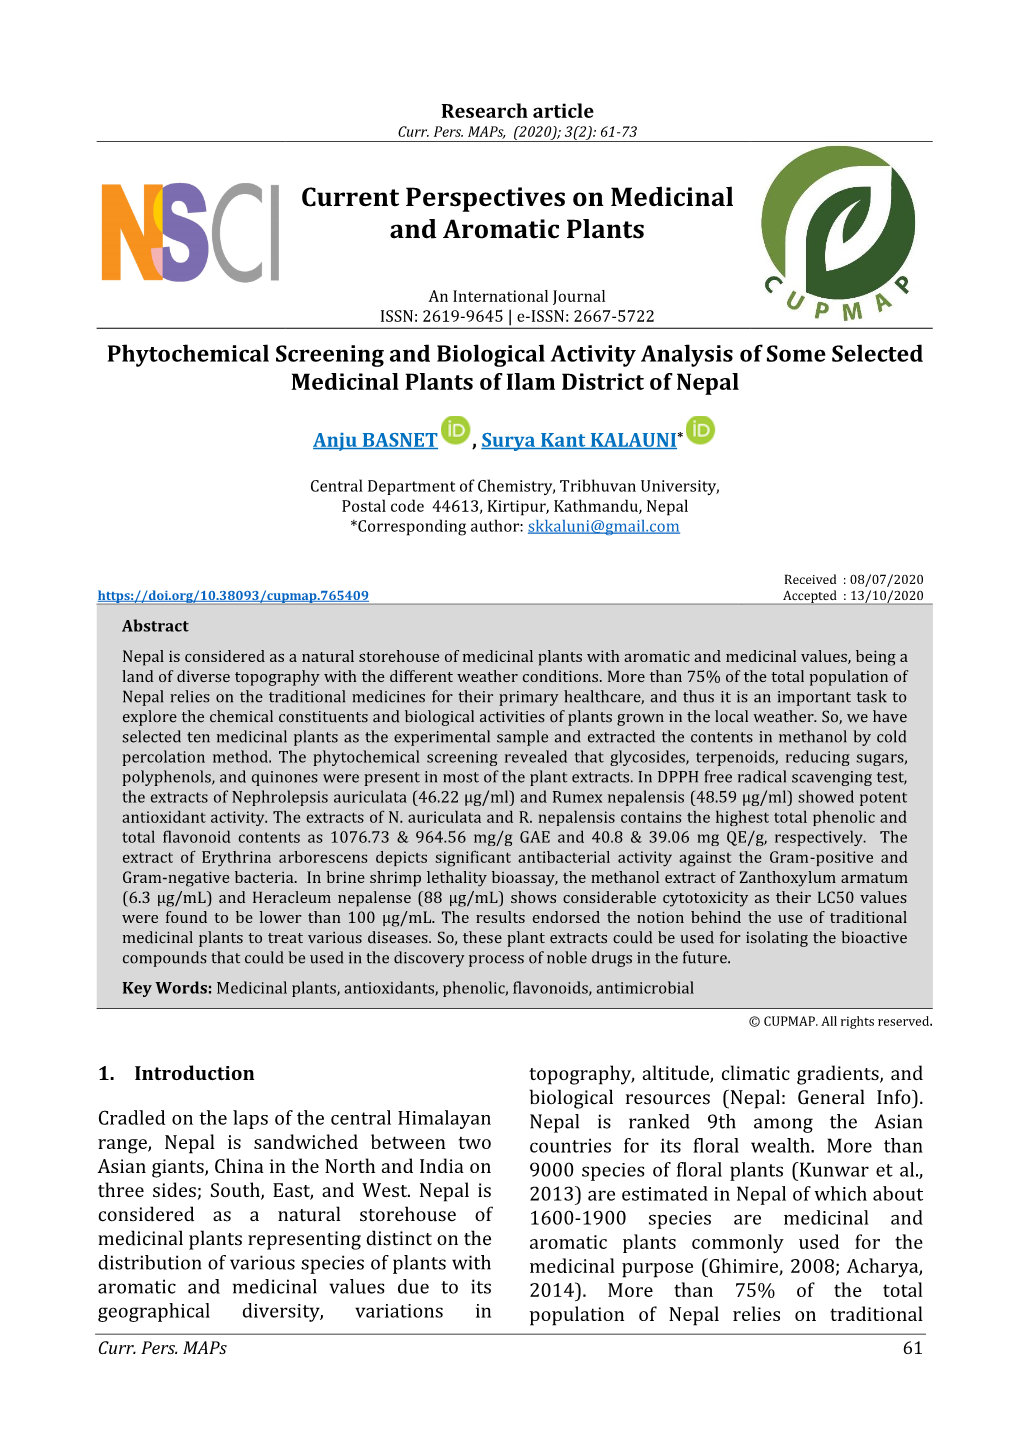 Current Perspectives on Medicinal and Aromatic Plants